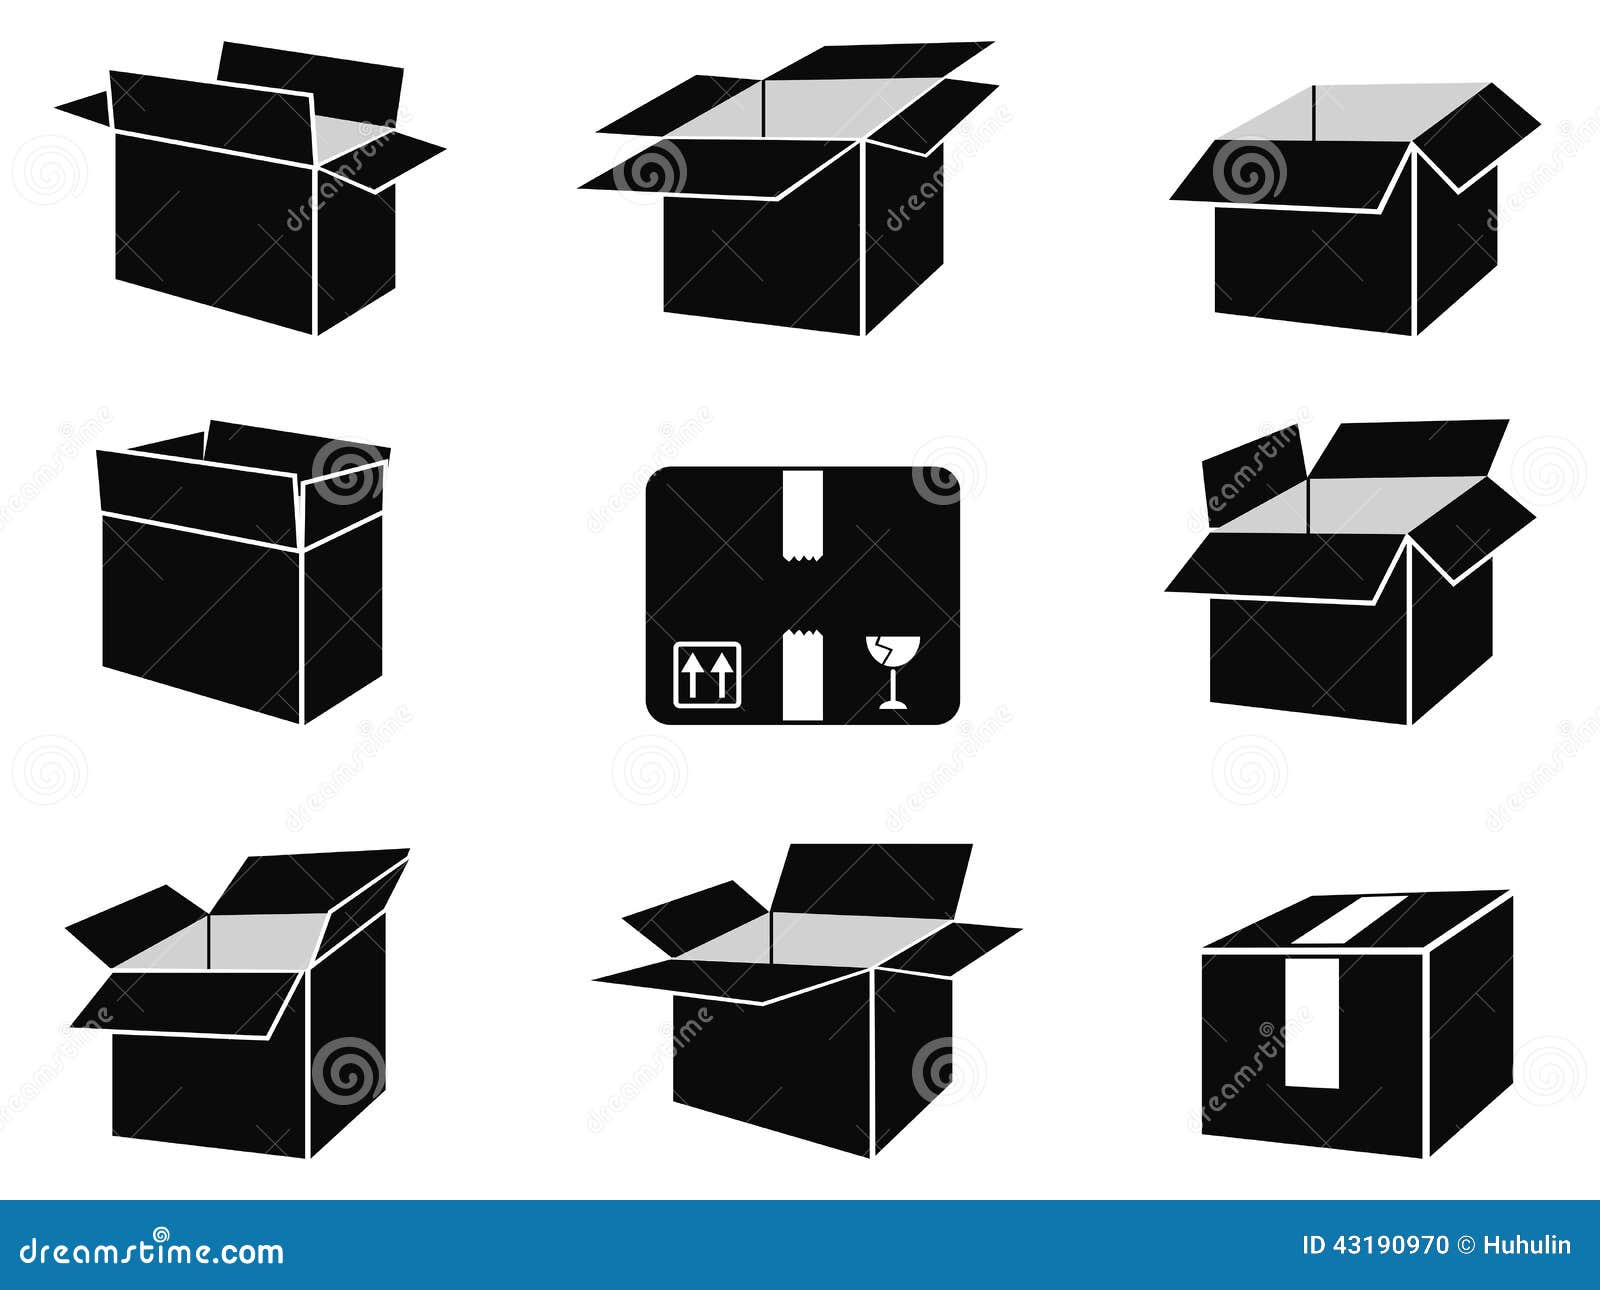 Shipping box icons stock vector. Illustration of business - 43190970